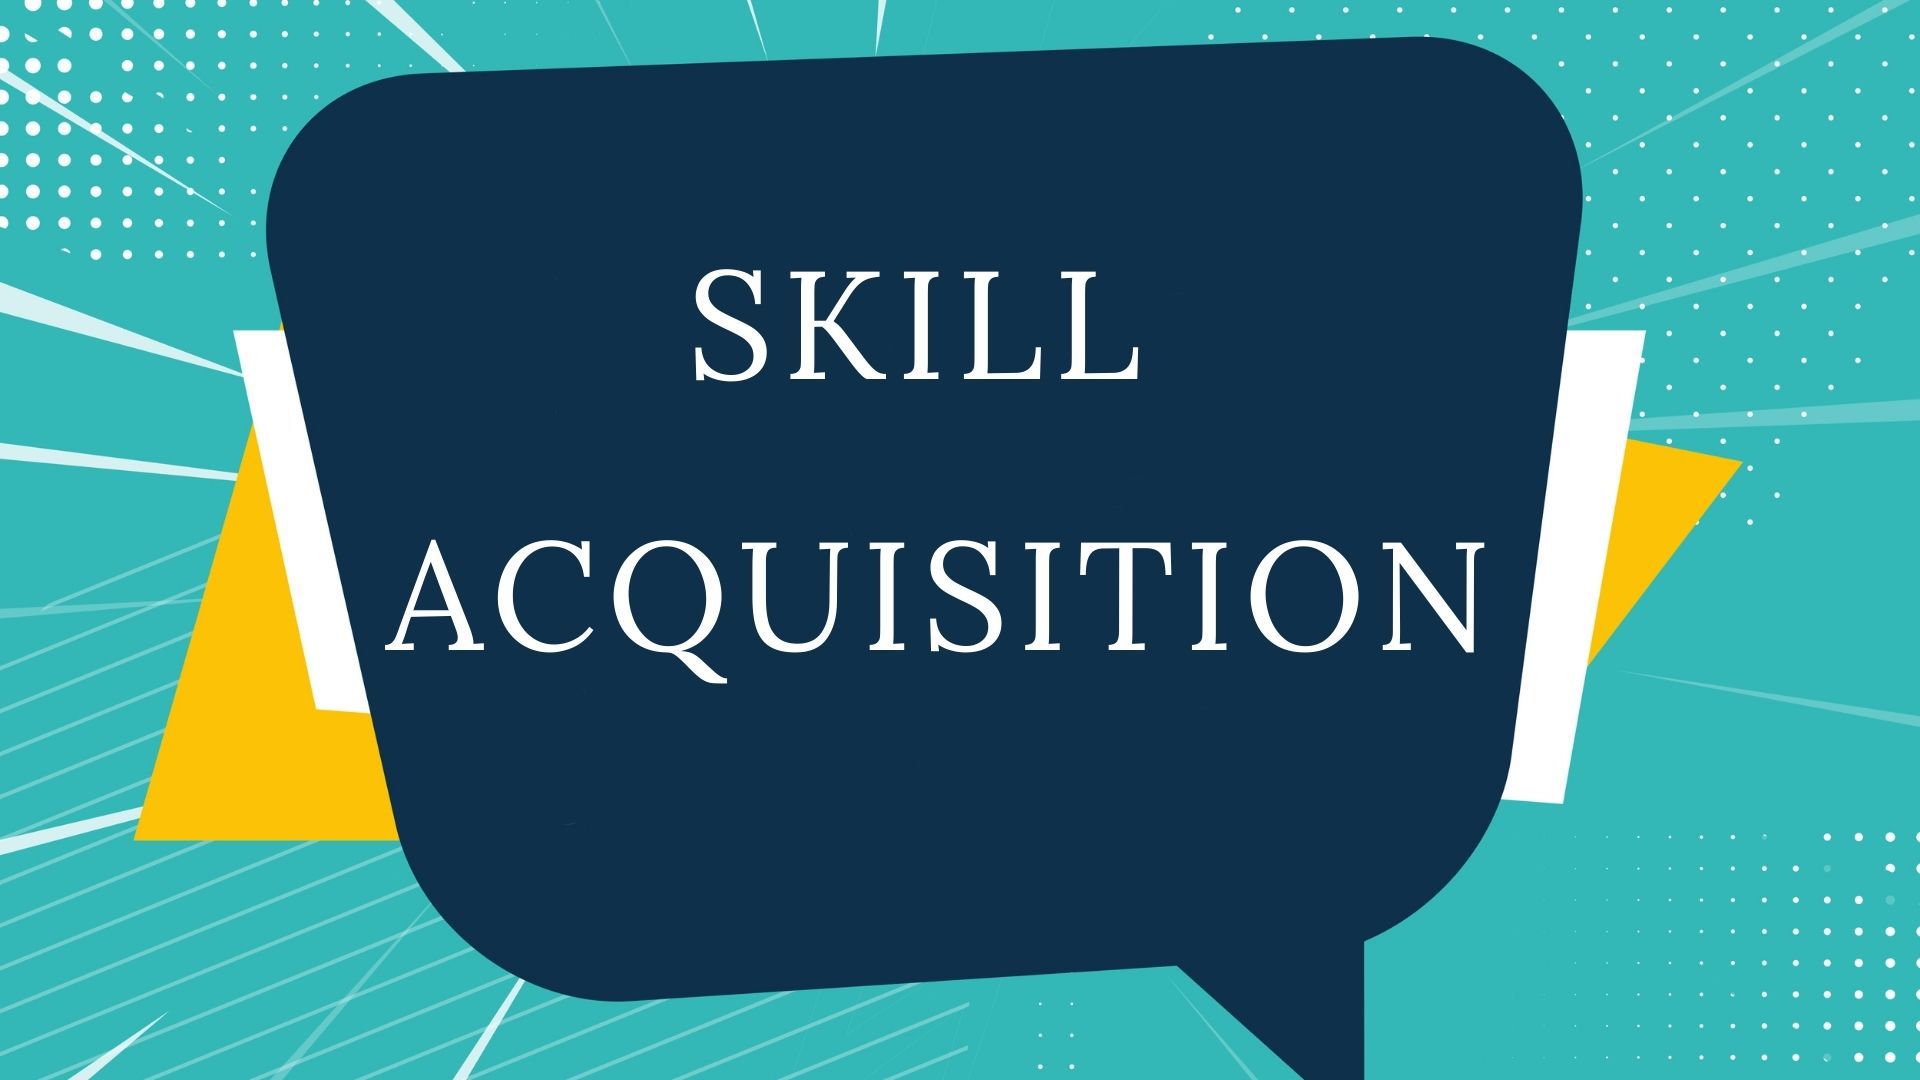 an essay on skill acquisition